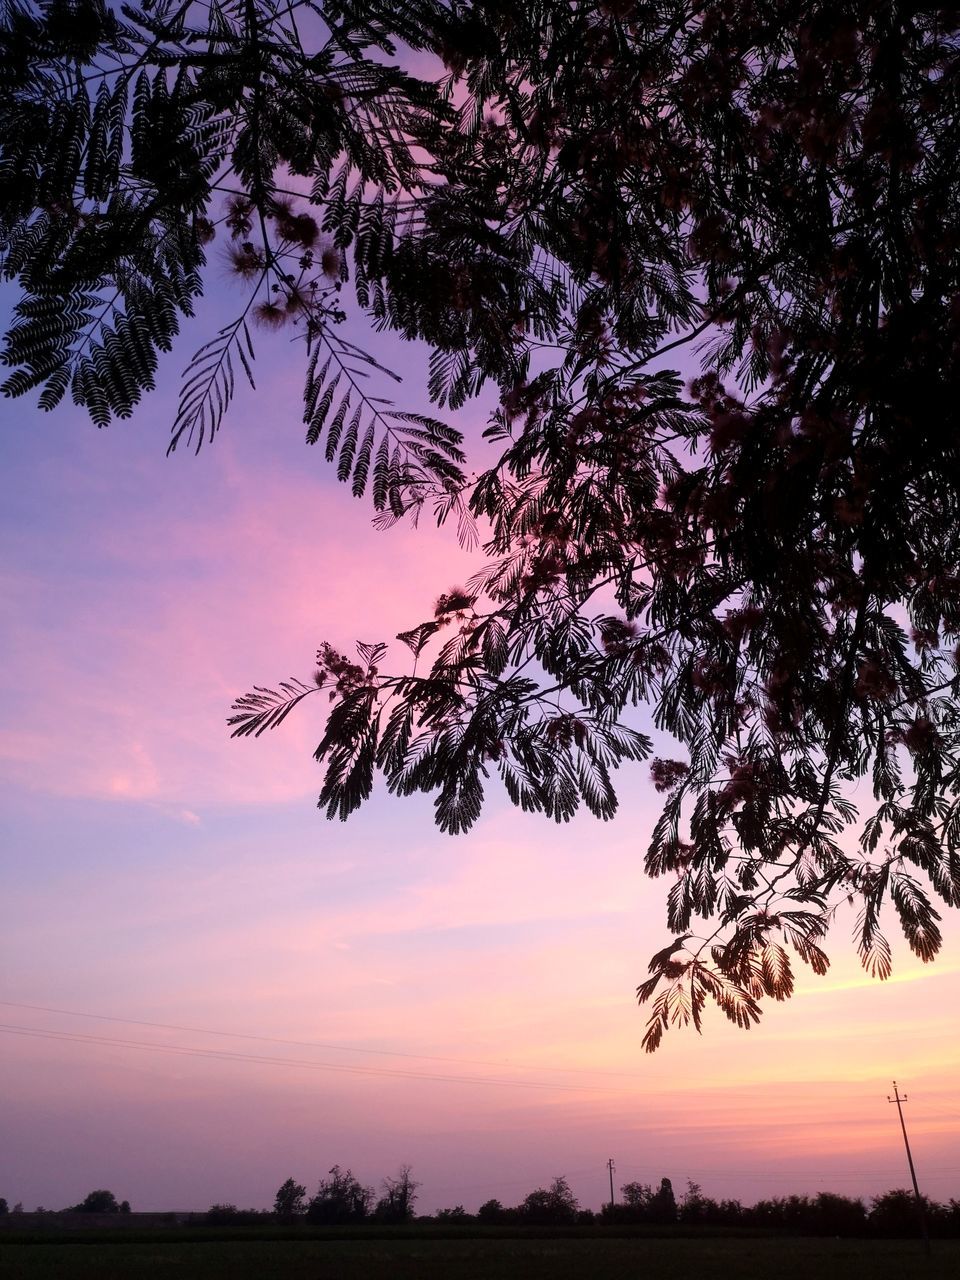 tree, sunset, sky, plant, beauty in nature, nature, scenics - nature, landscape, environment, silhouette, tranquility, dawn, cloud, tranquil scene, land, pink, no people, evening, twilight, sun, outdoors, idyllic, dramatic sky, branch, rural scene, travel destinations, non-urban scene, growth, afterglow, travel, sunlight, purple, field, horizon, leaf, multi colored, water, orange color, plant part, romantic sky